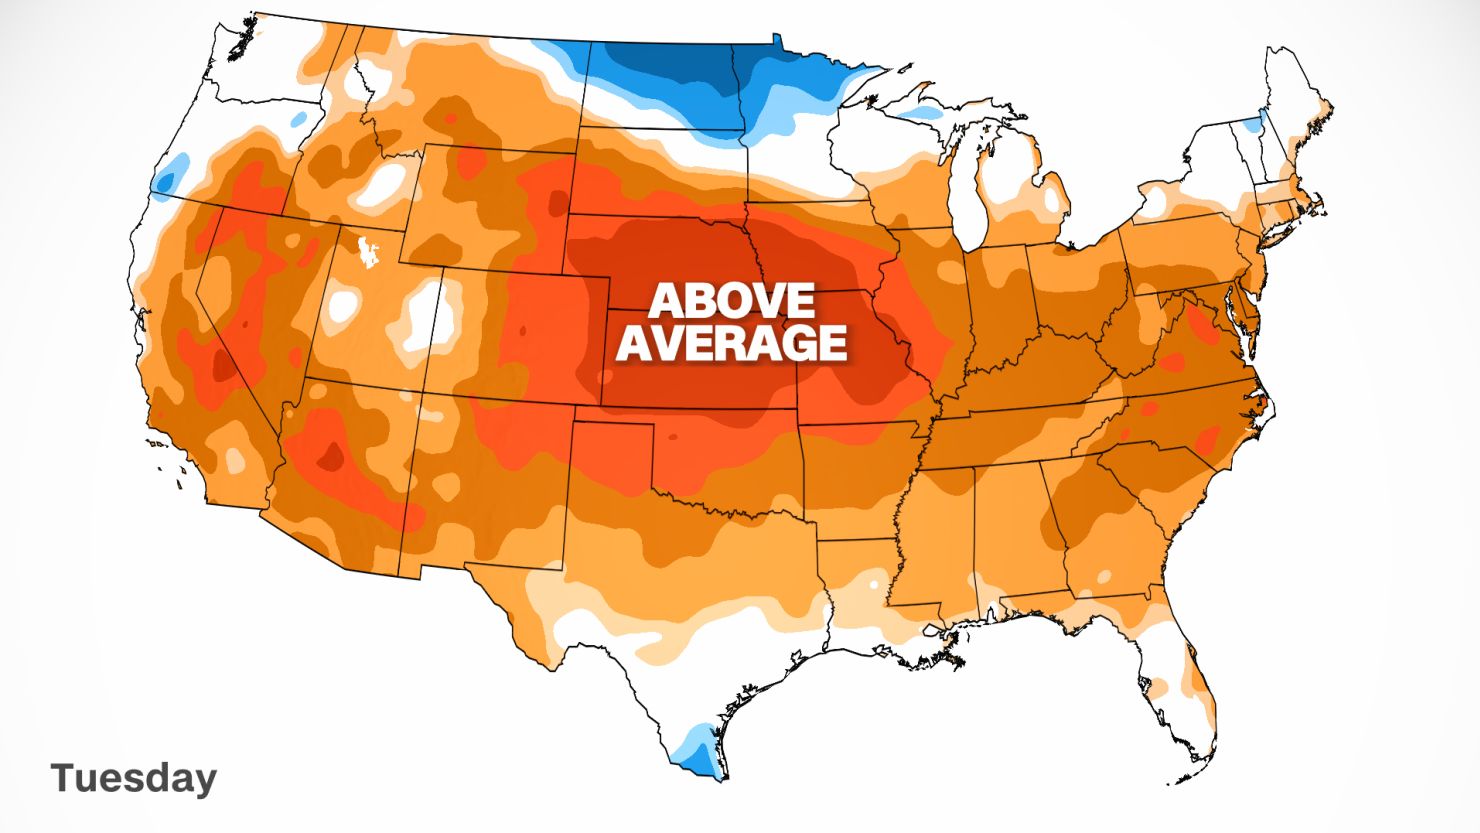 The first day of meteorological spring on Tuesday will feel above average for many across the nation.